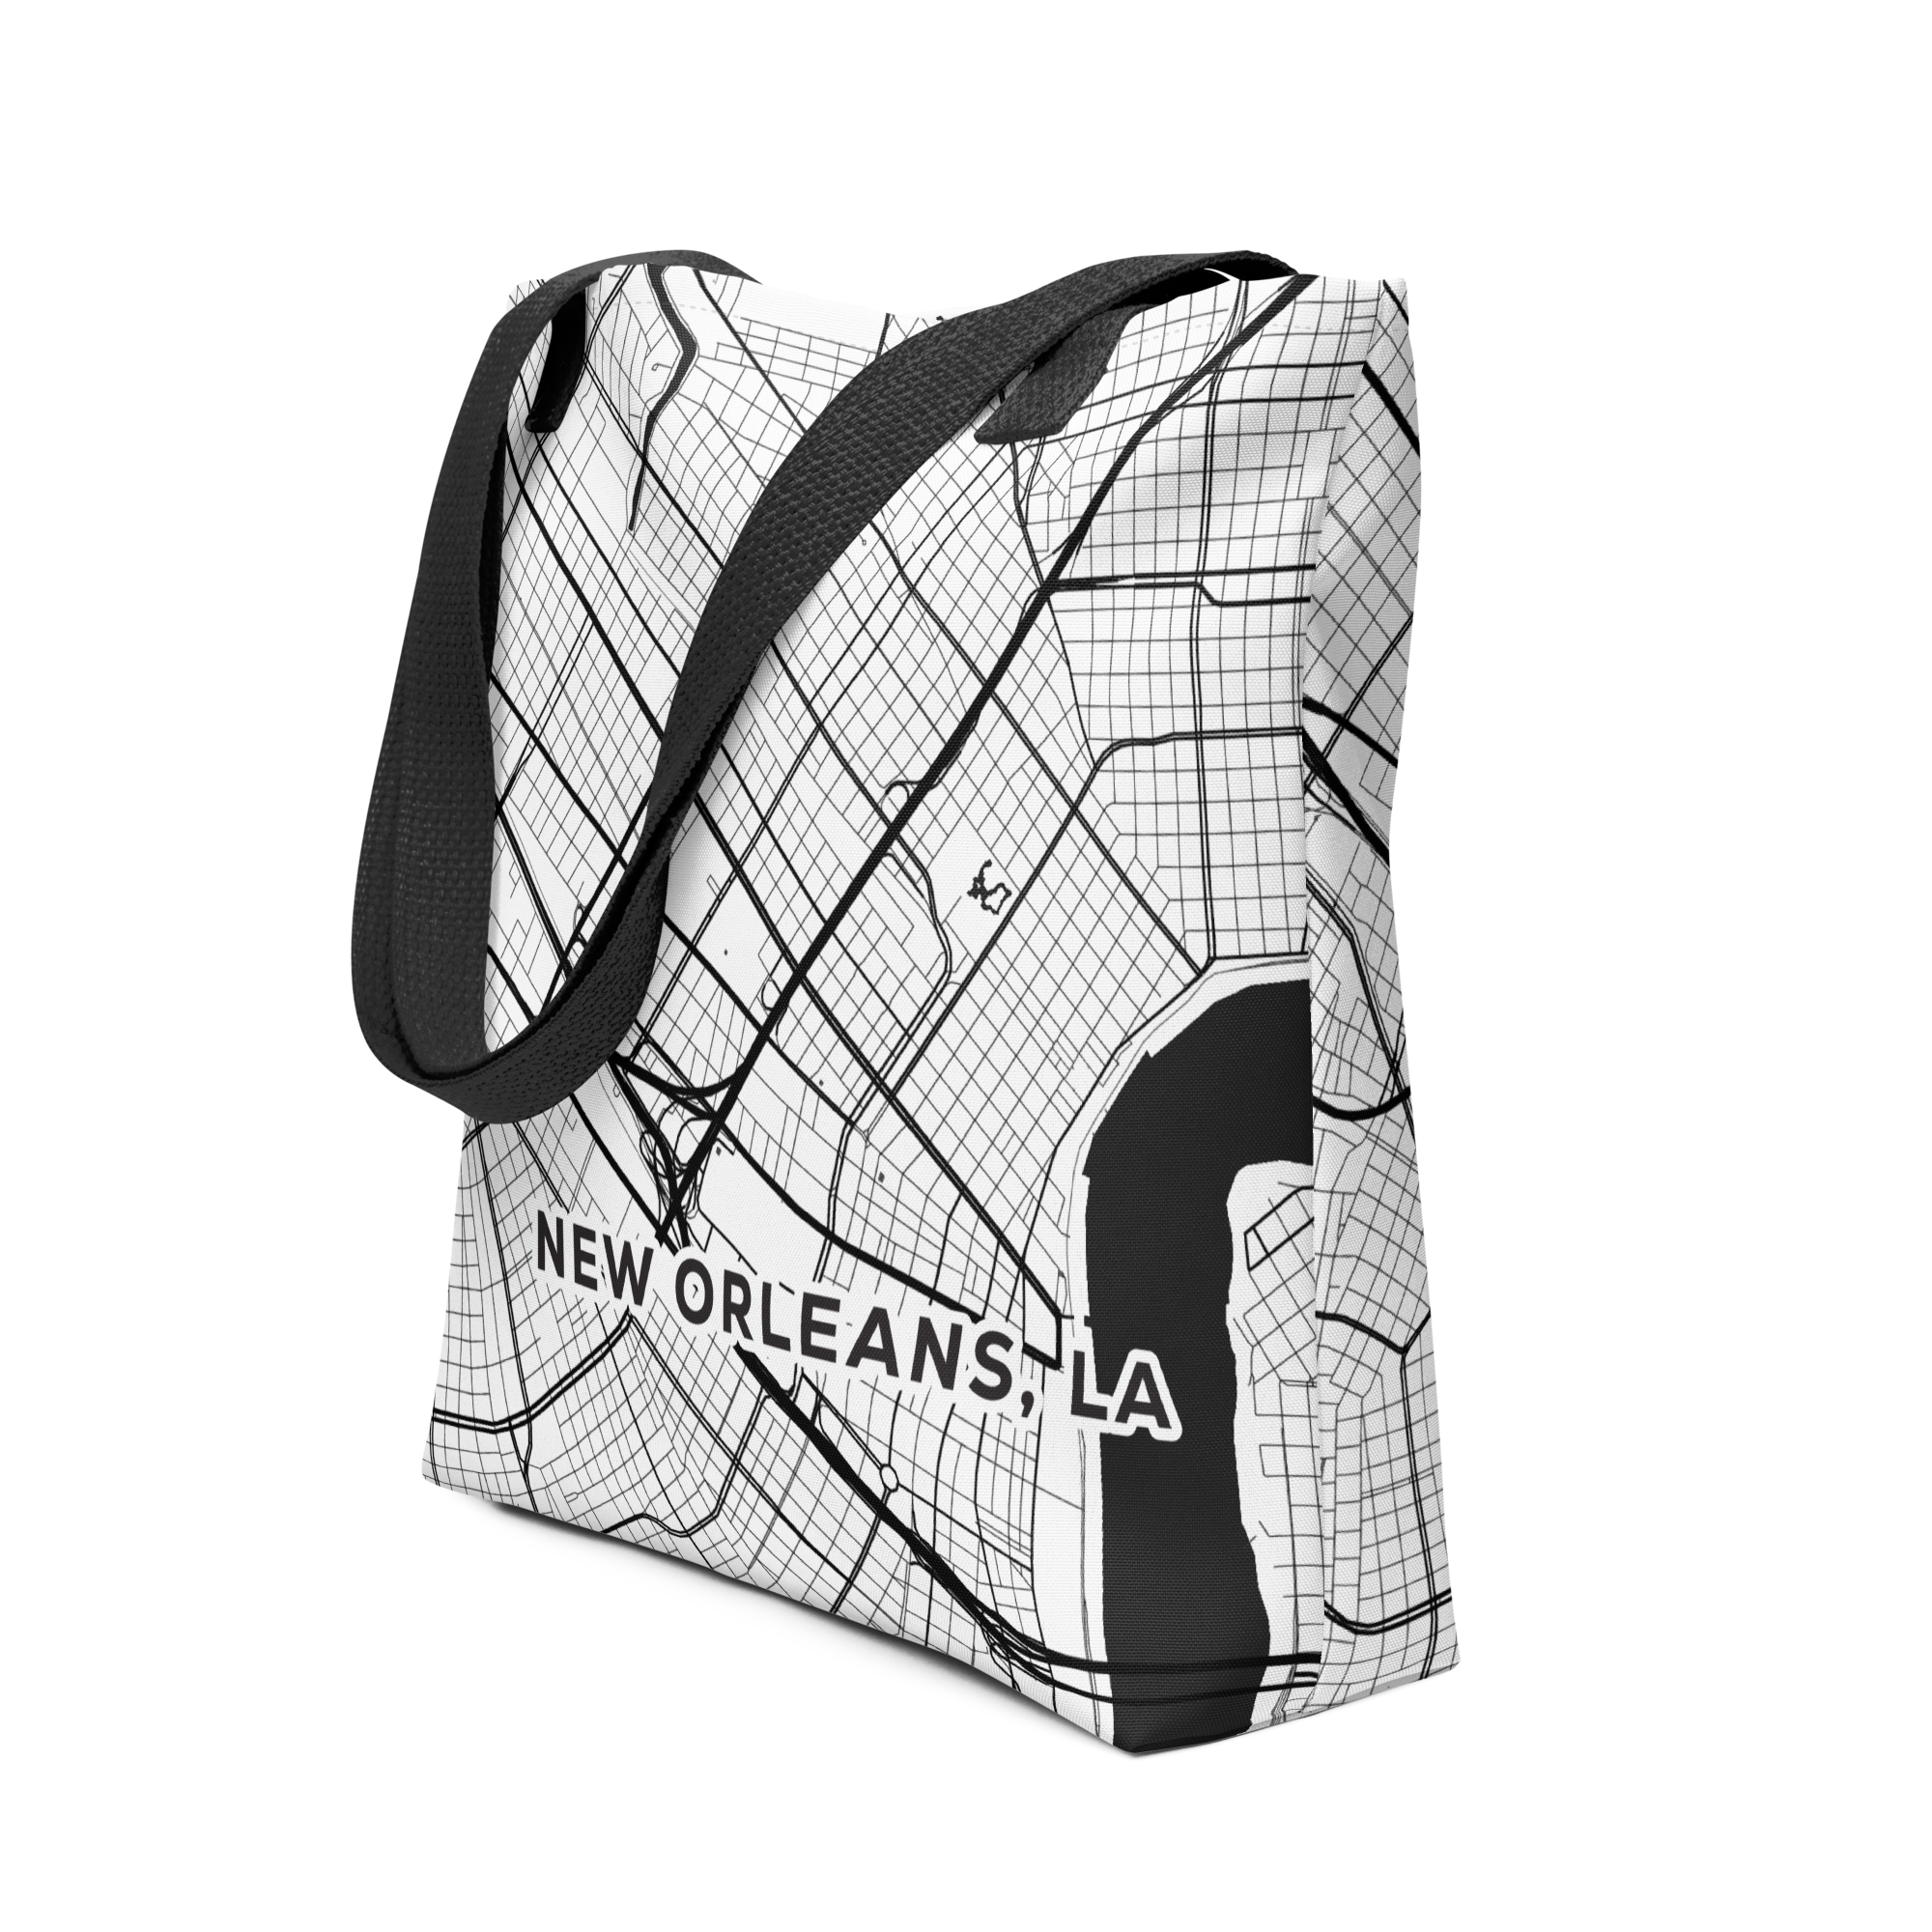 CITY STREET MAP Tote Bags